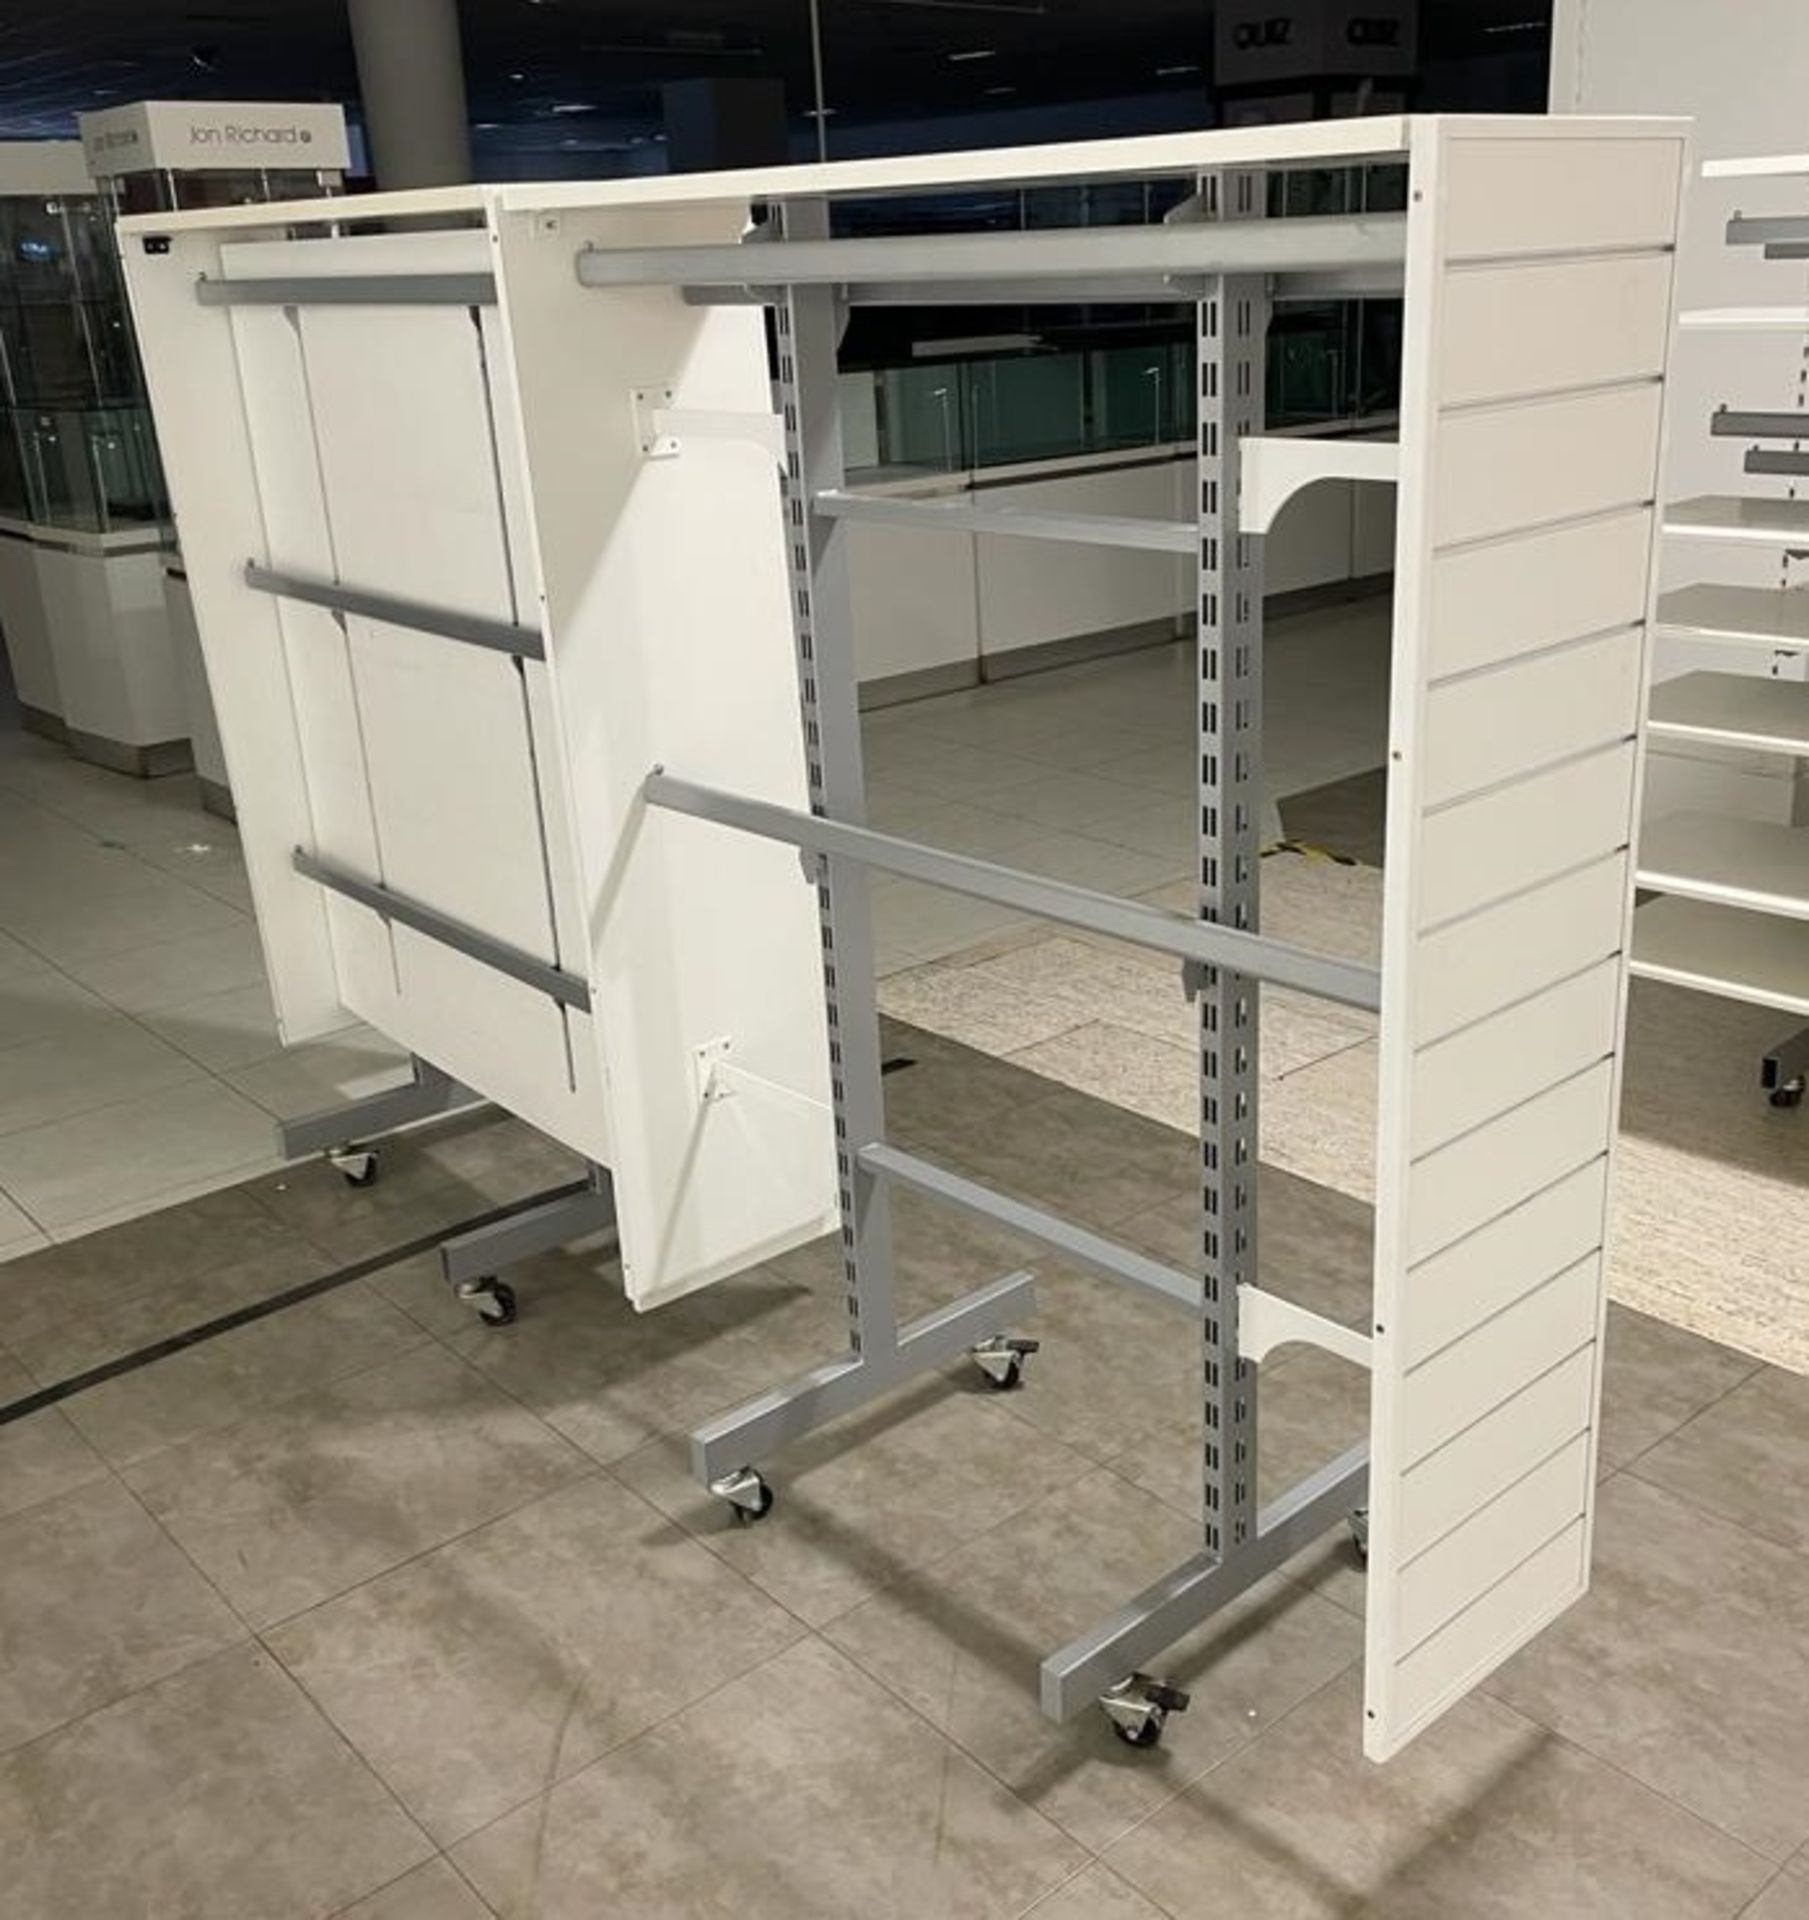 2 x Retail Display Units in White Featuring Clothes Rails, Slat Walls and Castor Wheels - Size